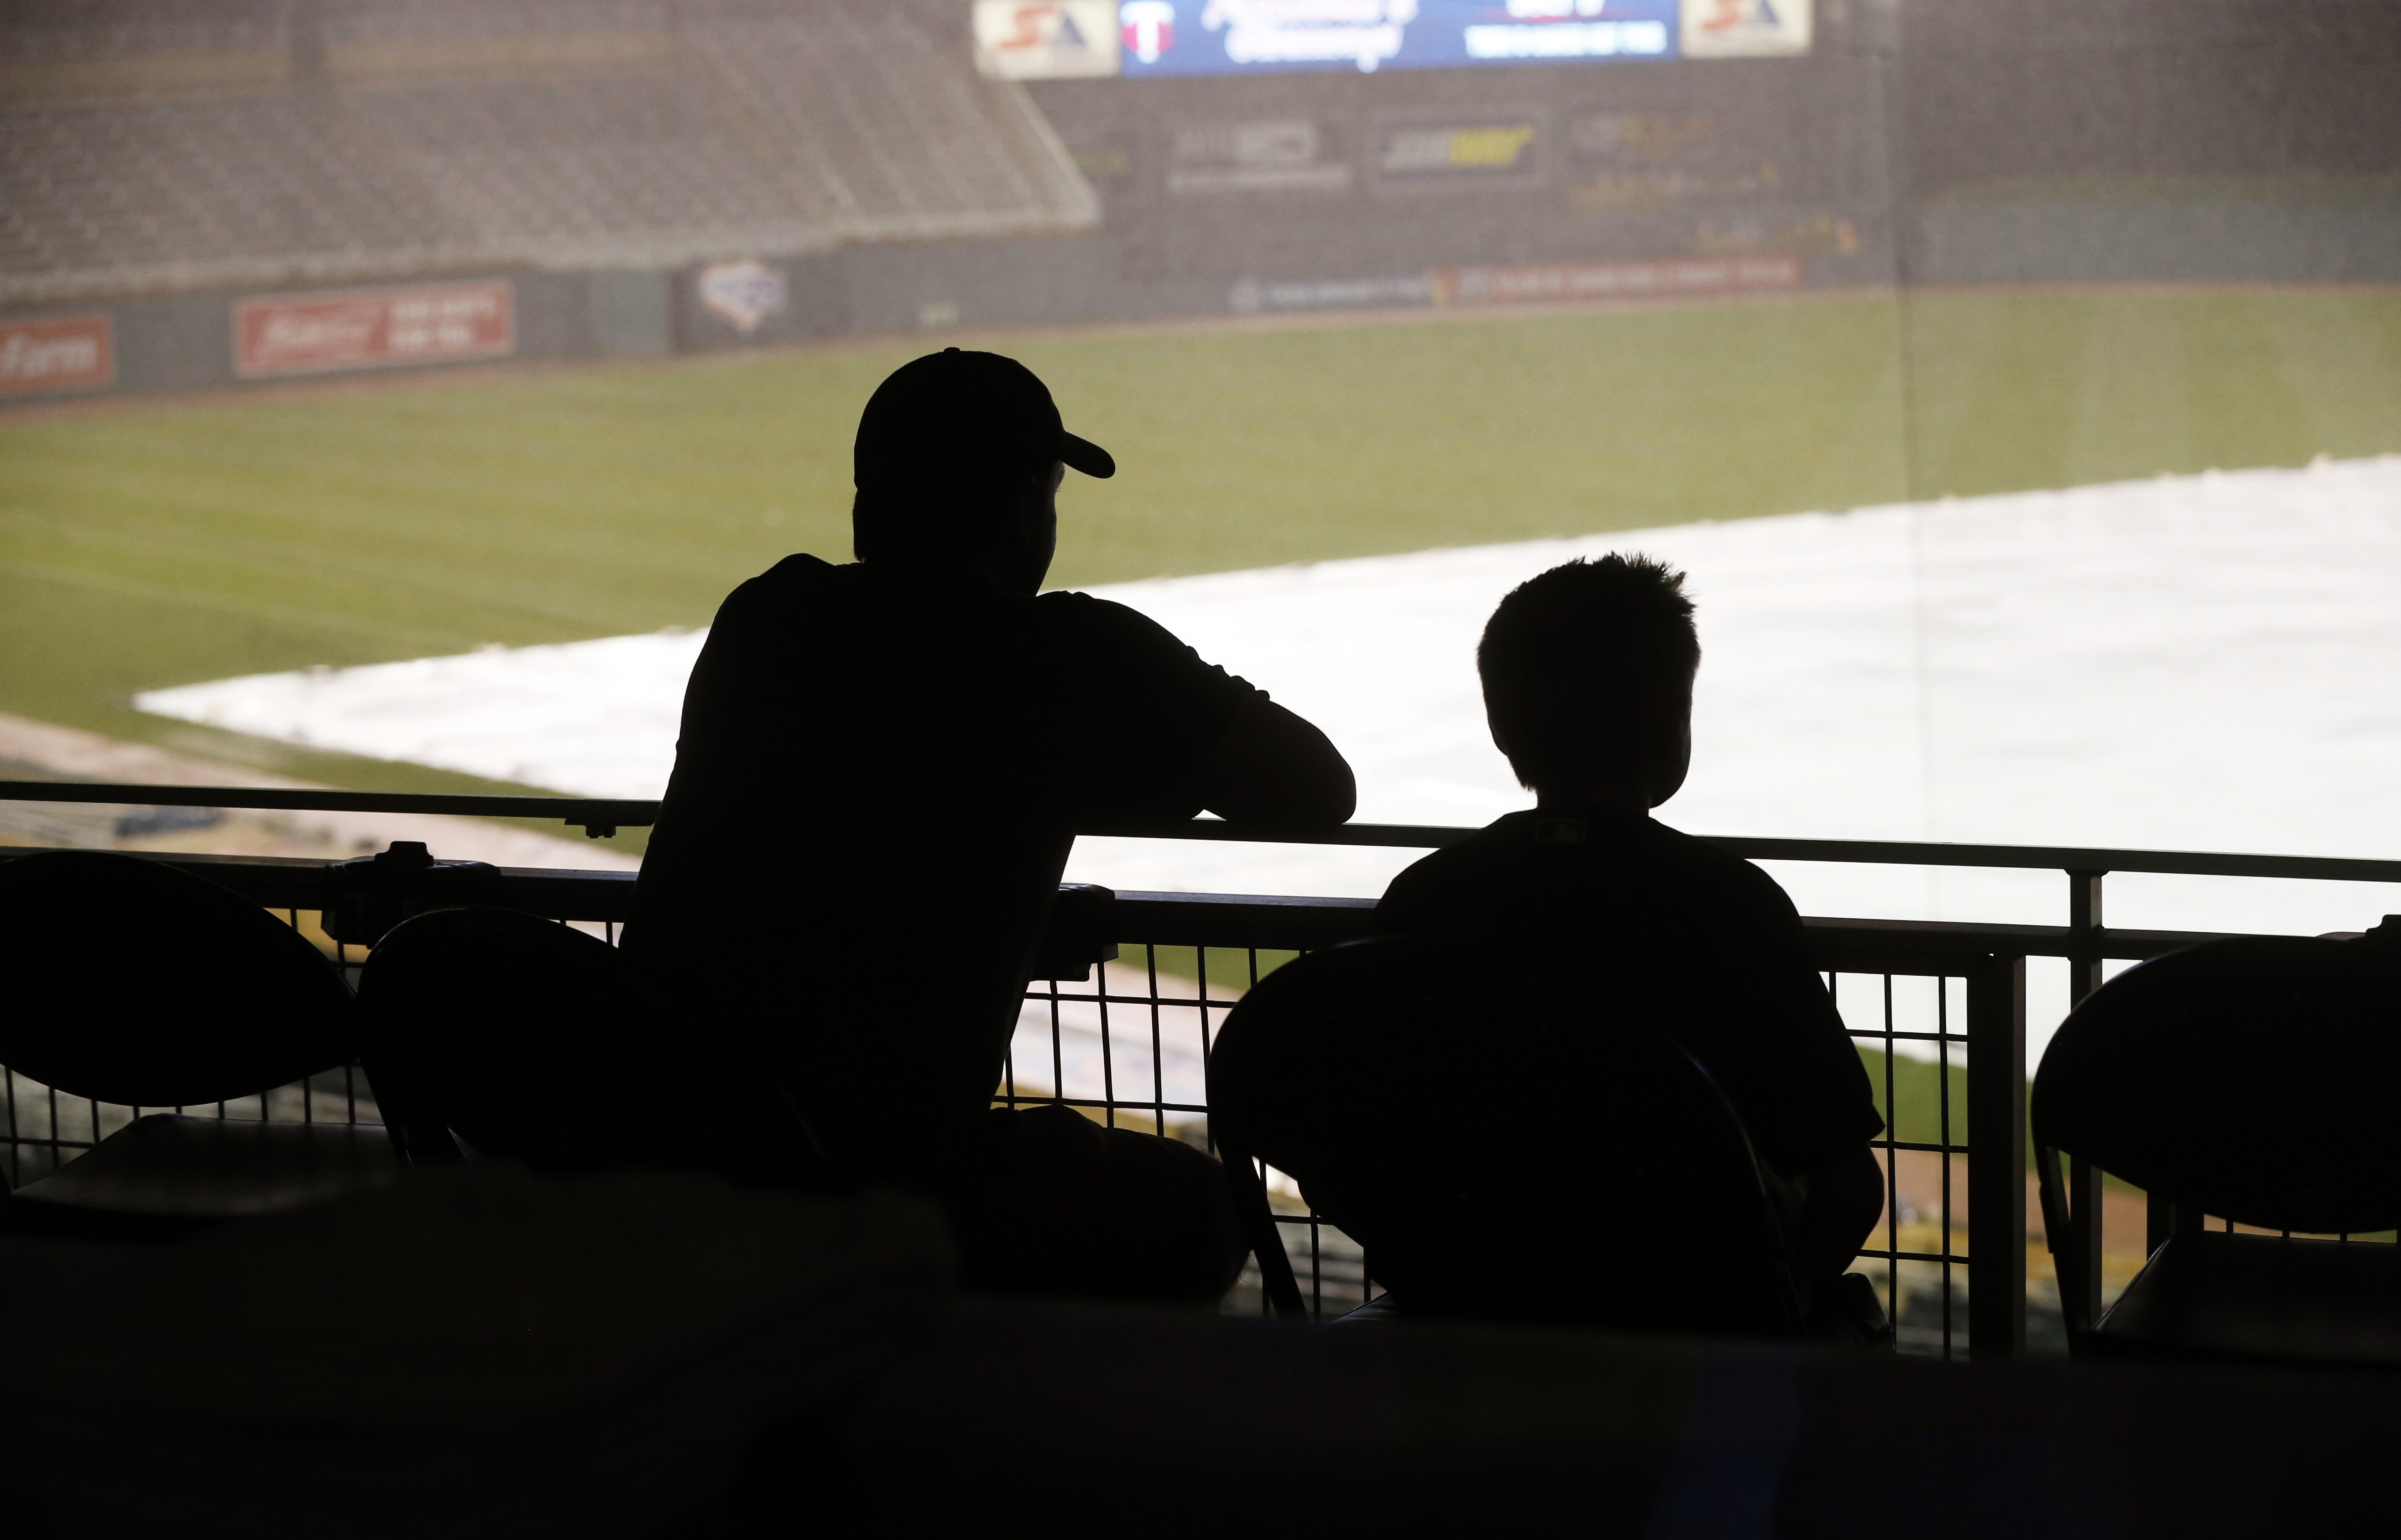 A man and boy look out to the tarp-covered infield at Target Field where heavy rain, lightning and wind delayed the start of the baseball game between the Minnesota Twins and the Oakland Athletics on Tuesday, July 5, 2016. (AP Photo/Jim Mone)